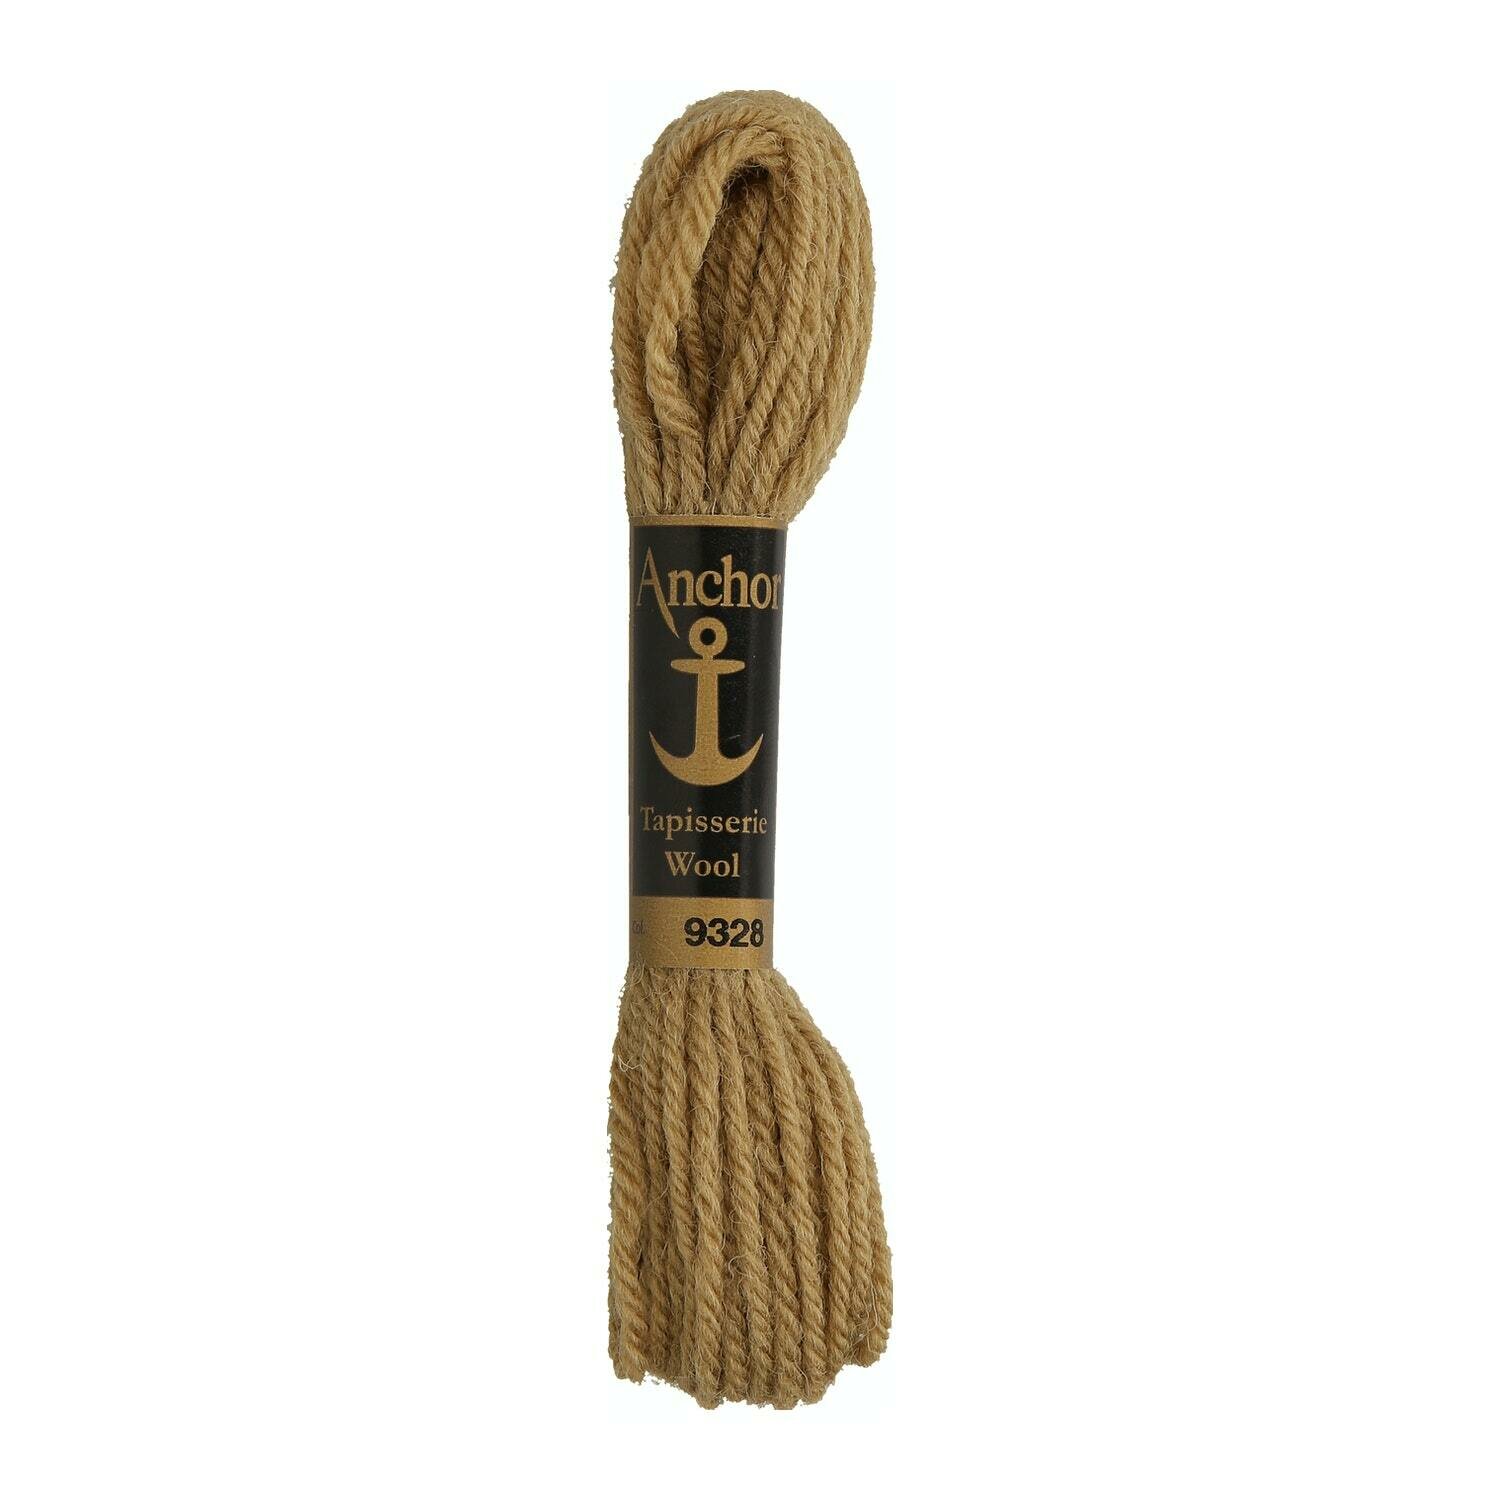 Anchor Tapisserie Wool # 09328